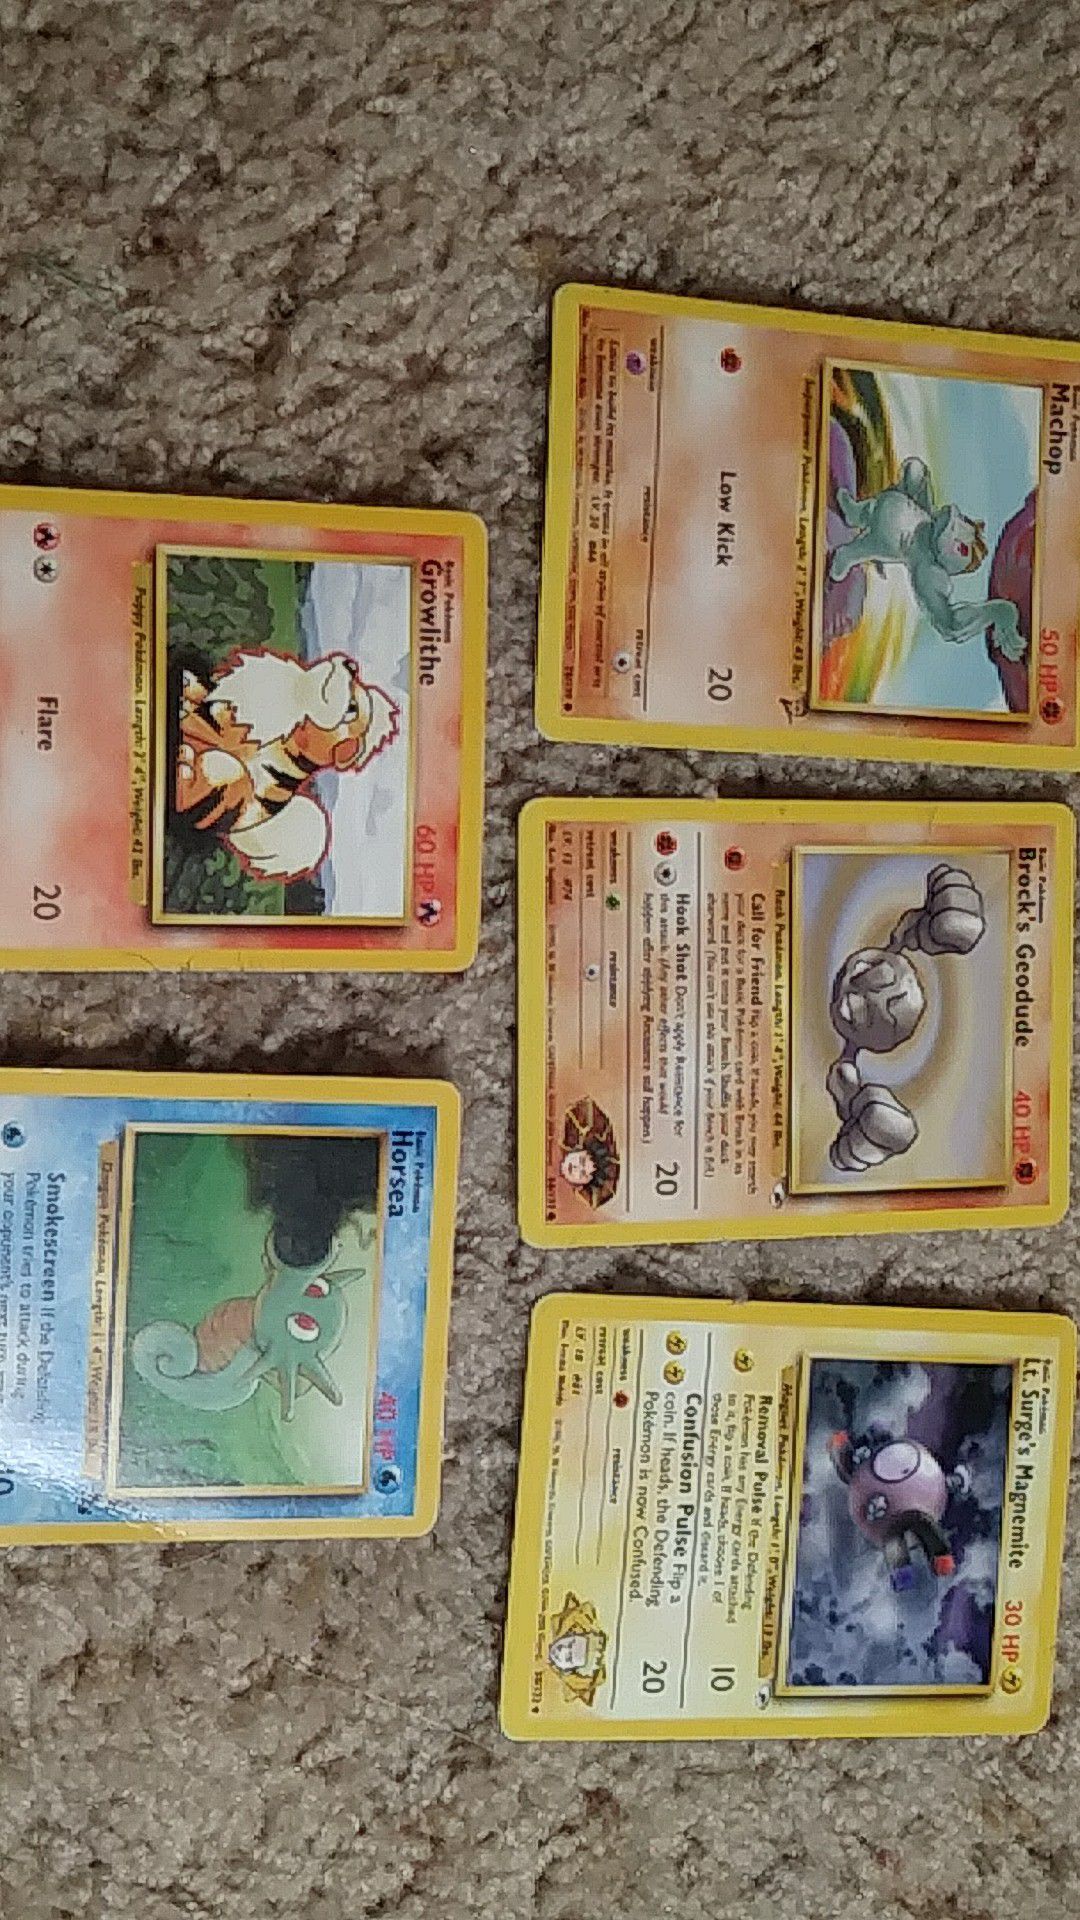 6 Pokemon Cards made in 1995